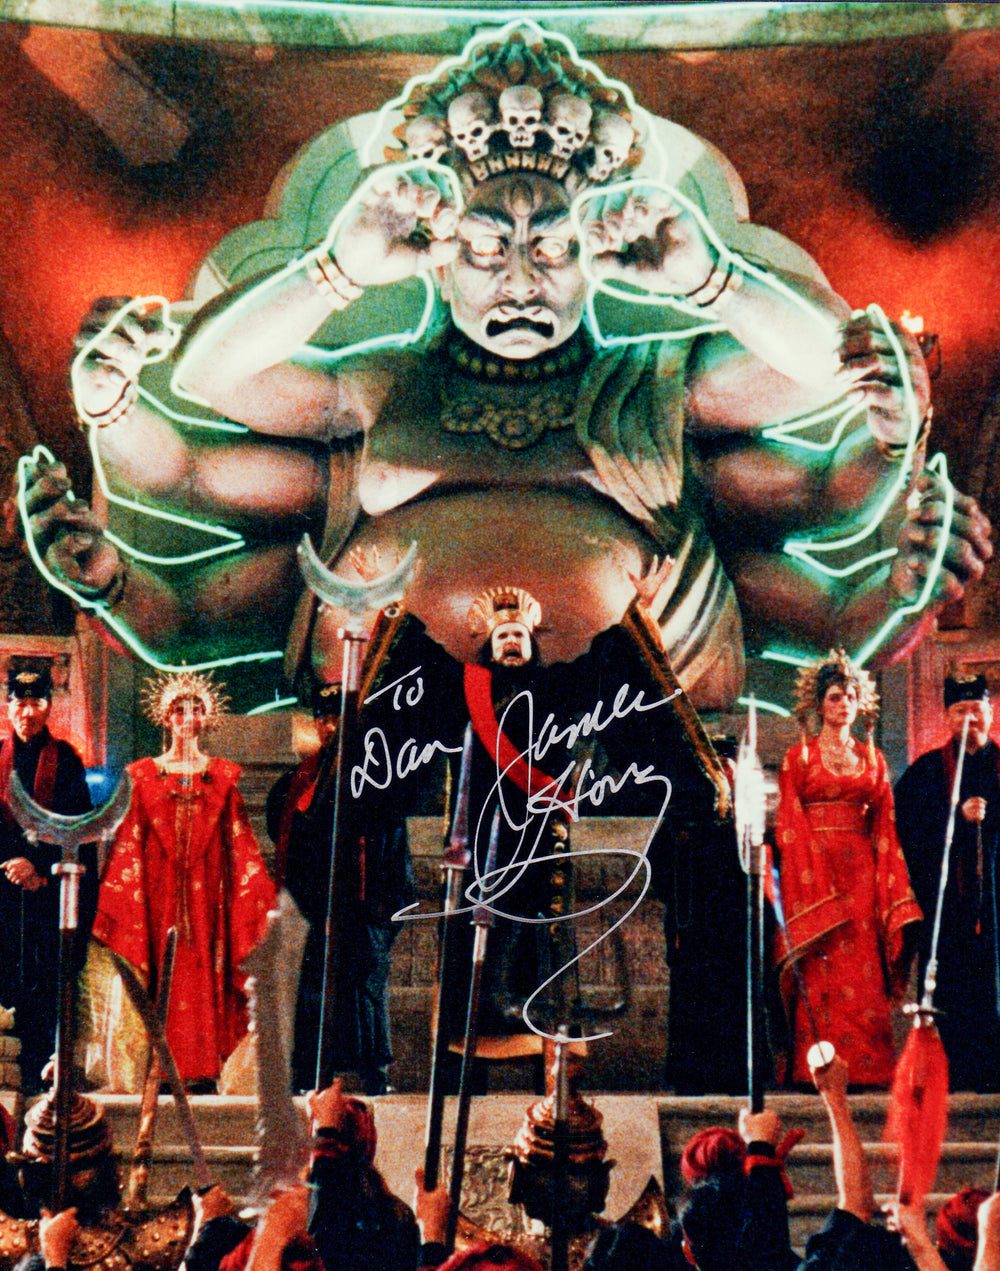 James Hong as David Lo Pan in John Carpenter's Big Trouble in Little China Signed 8x10 Photo